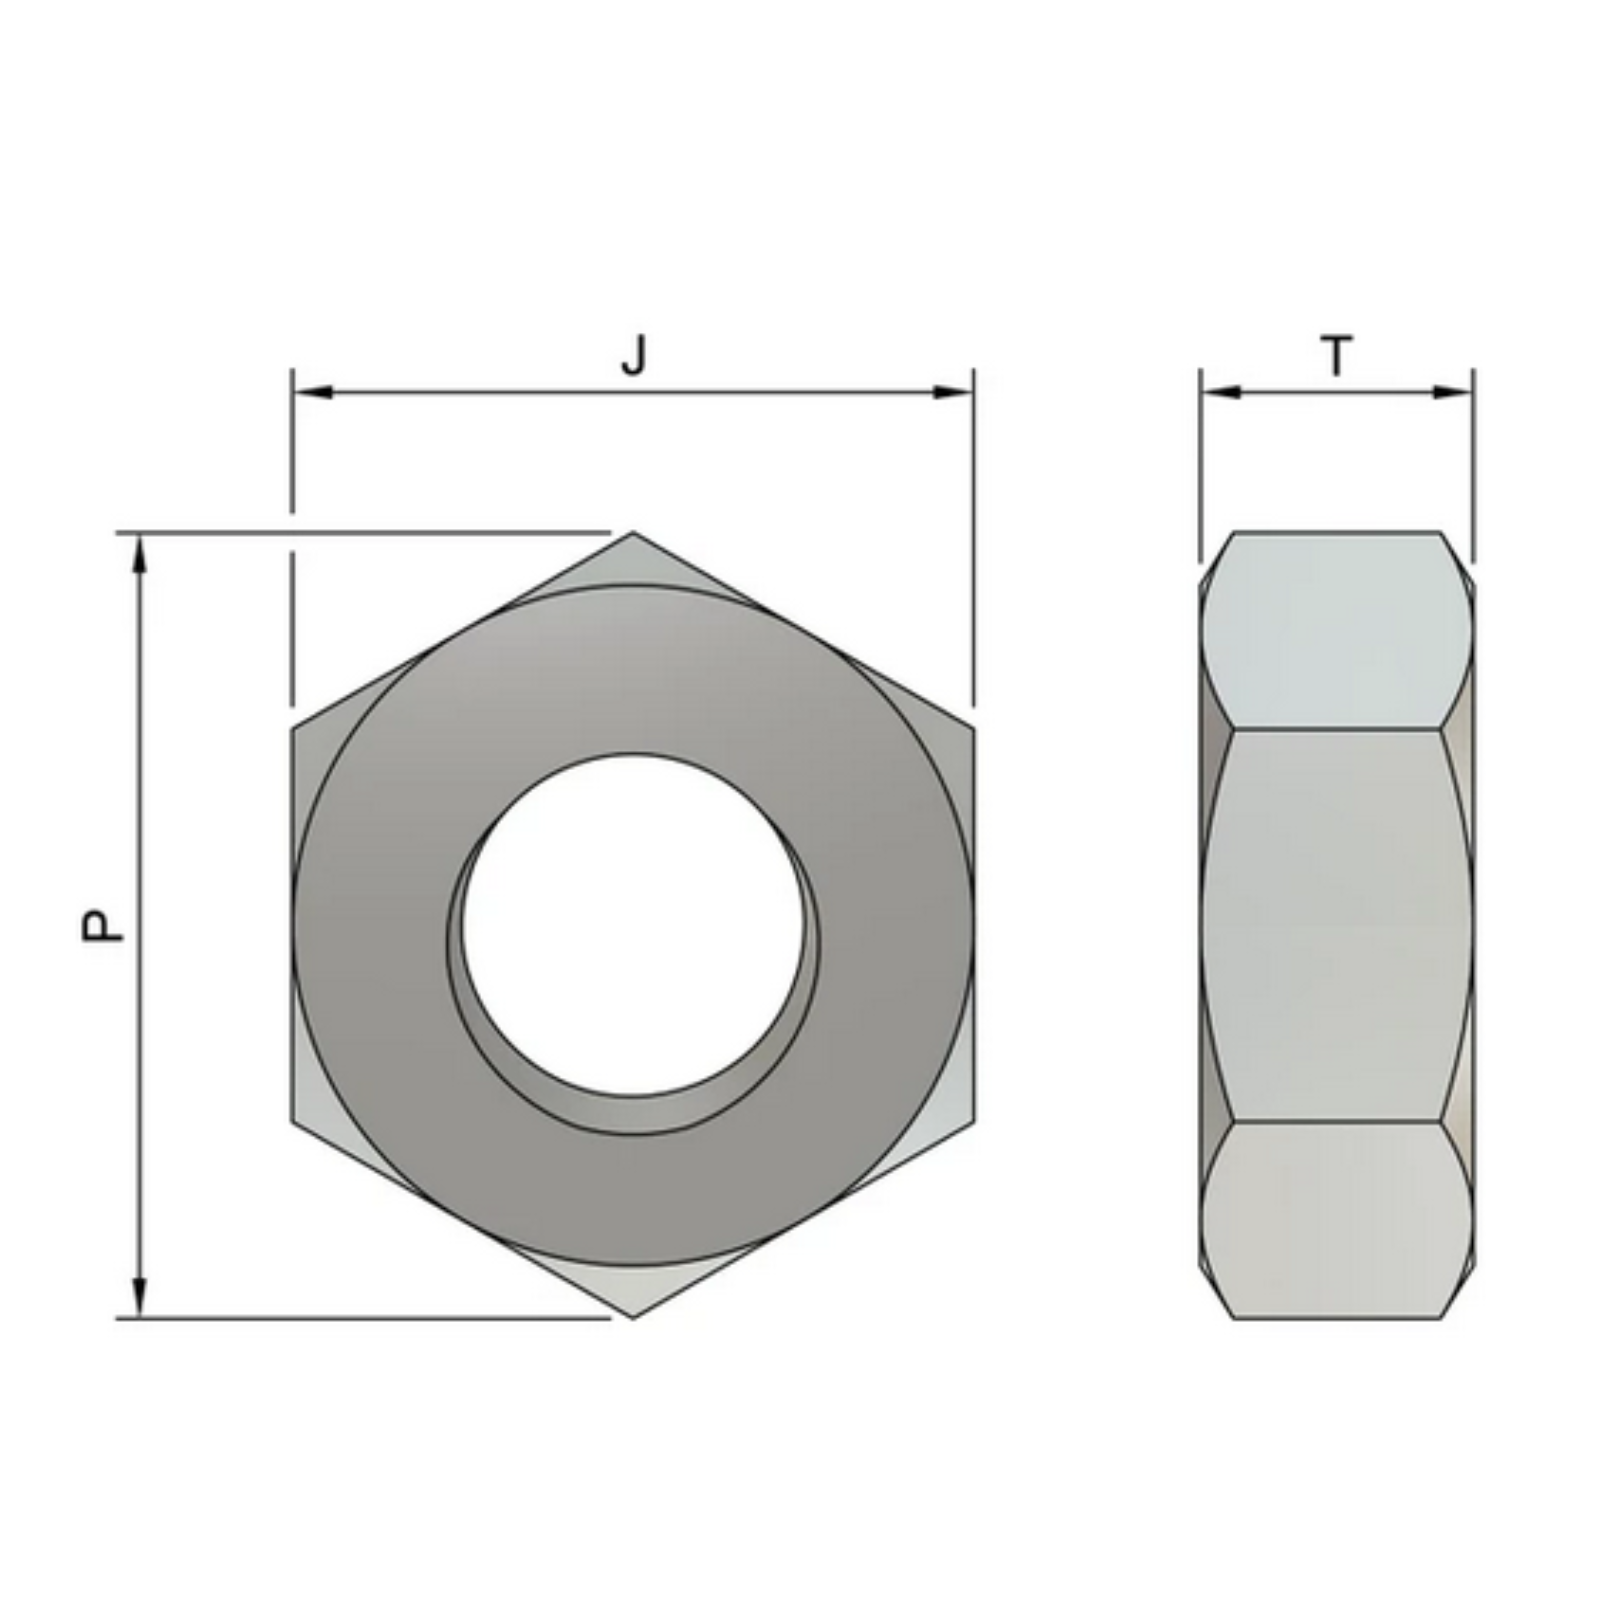 M5 Hexagon Nuts (DIN 934) - Stainless Steel (A2)